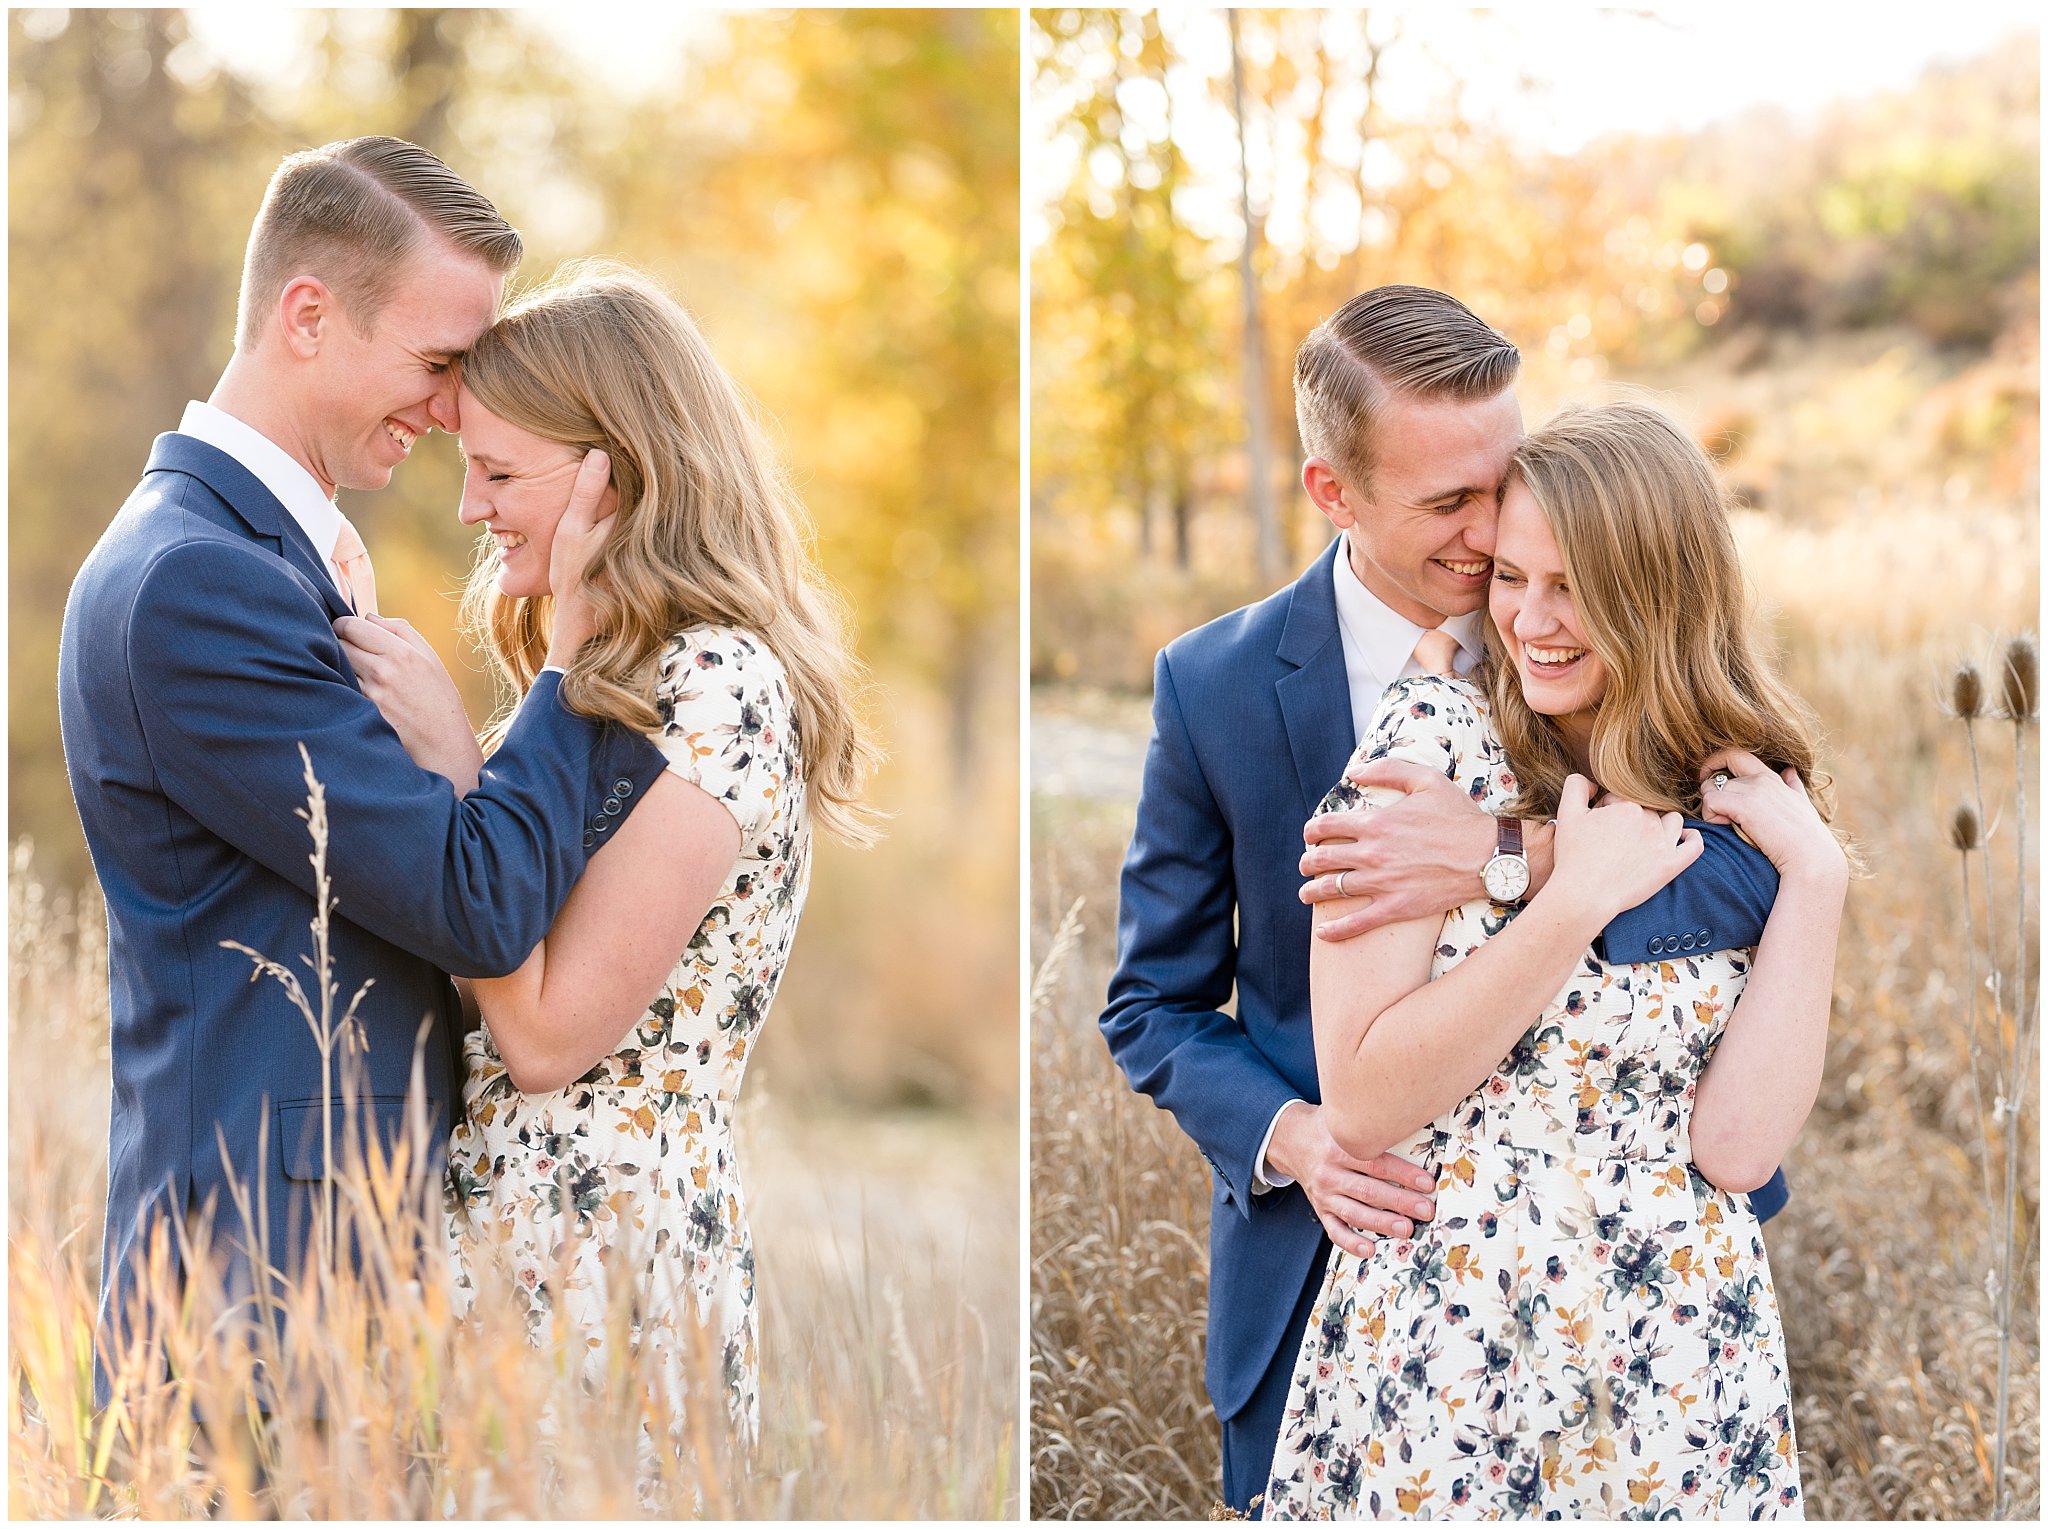 Couple laughing while wearing suit and dress | What to Wear for Your Engagement Session | Utah Wedding Photographers | Jessie and Dallin